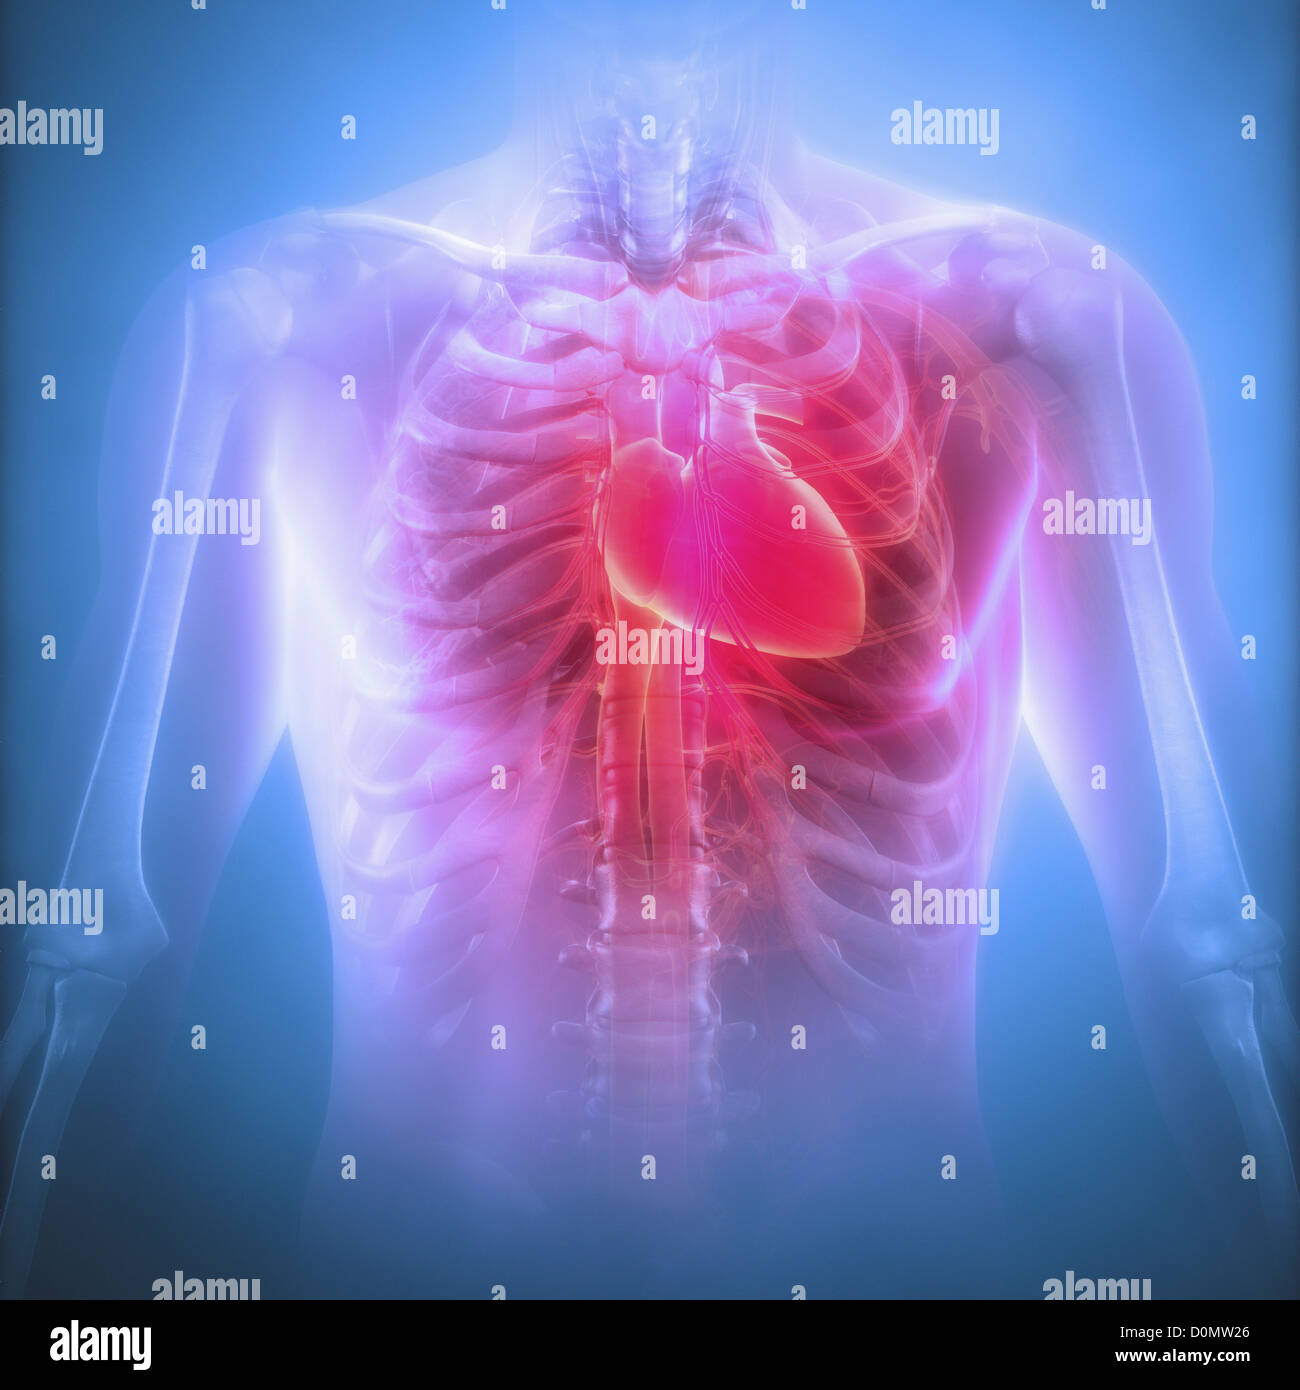 Anatomical model showing the human heart located in the rib cage. Stock Photo